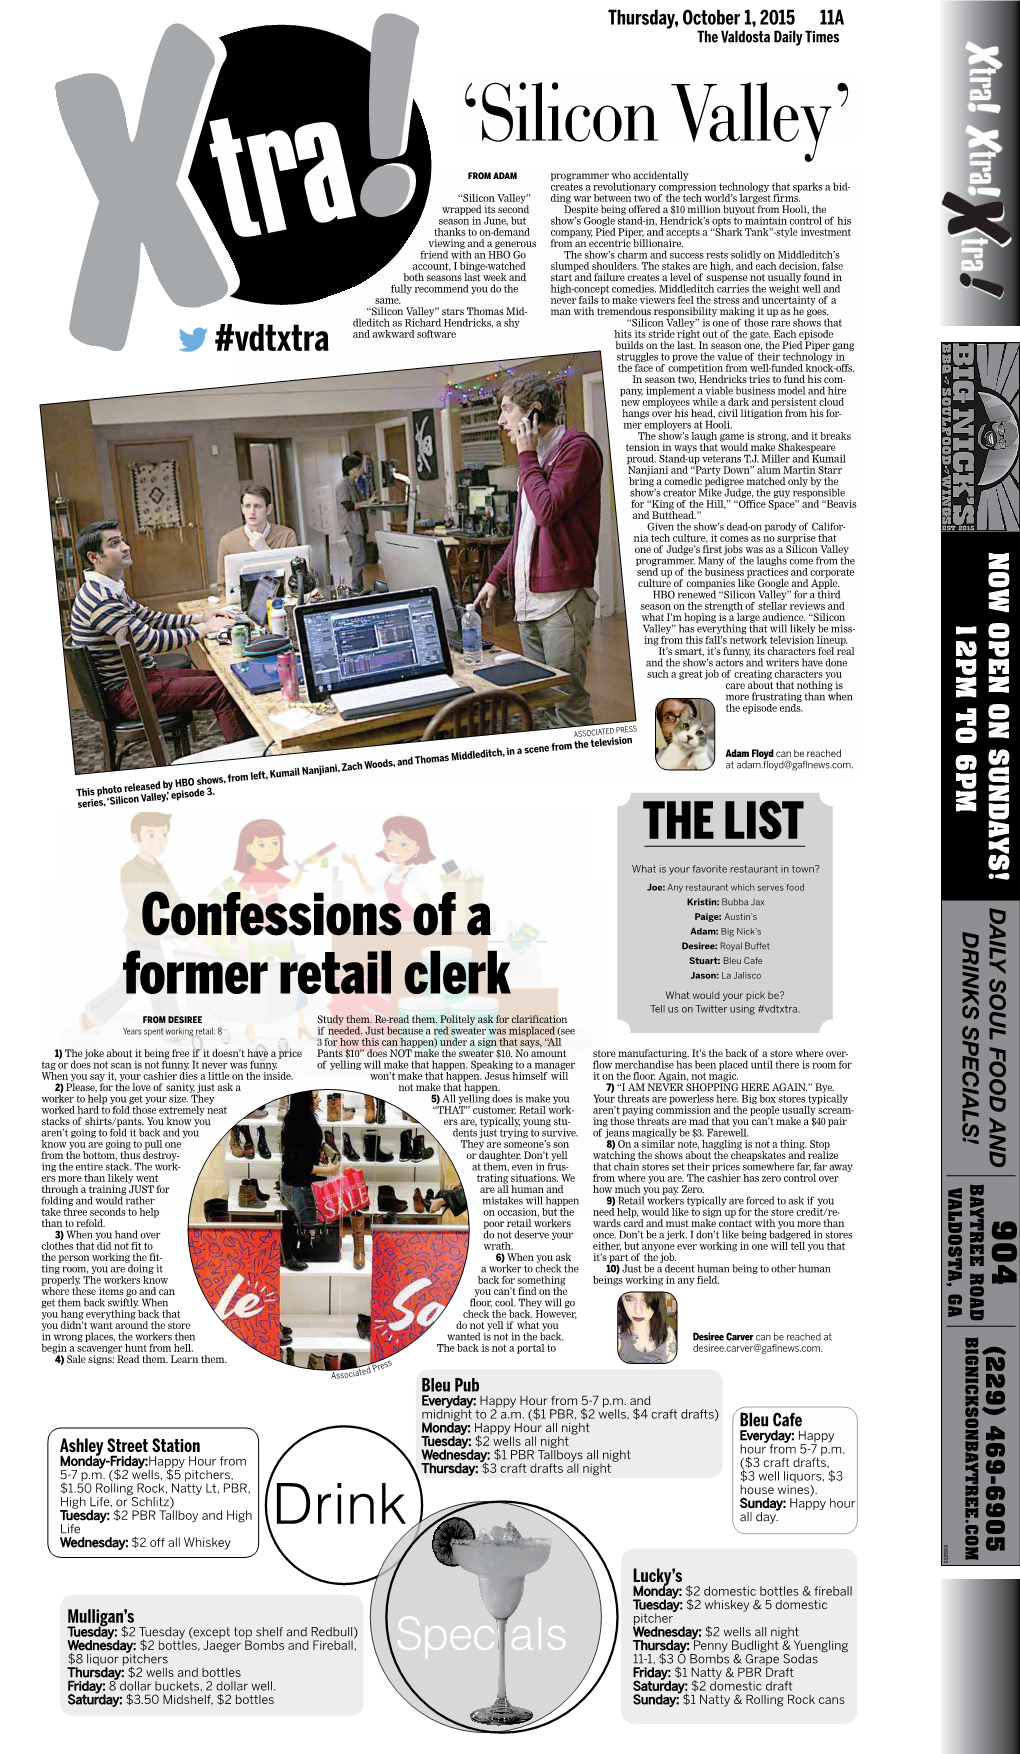 Confessions of a Former Retail Clerk